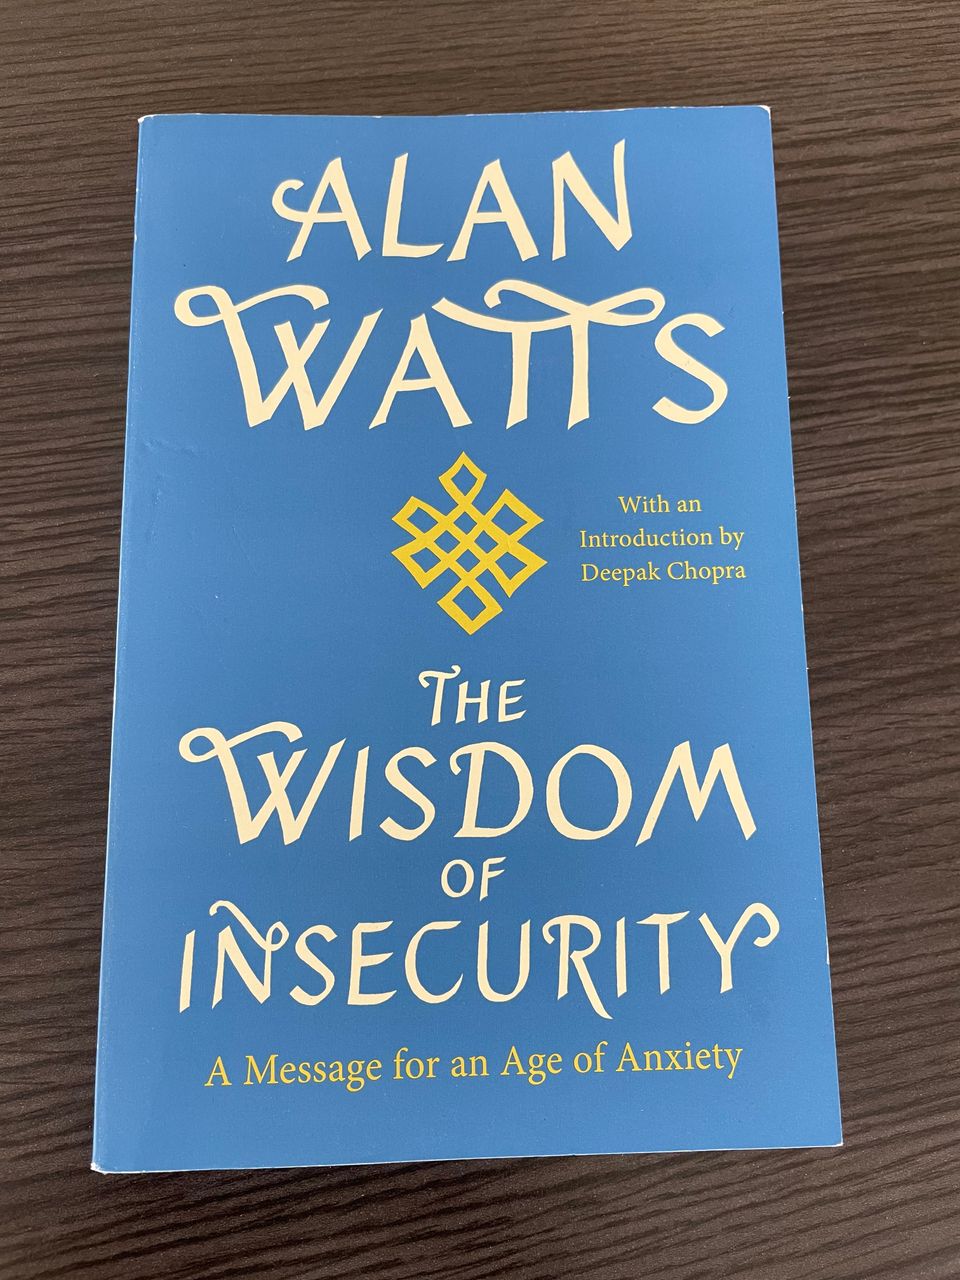 My takeaway from reading The Wisdom of Insecurity by Alan Watts